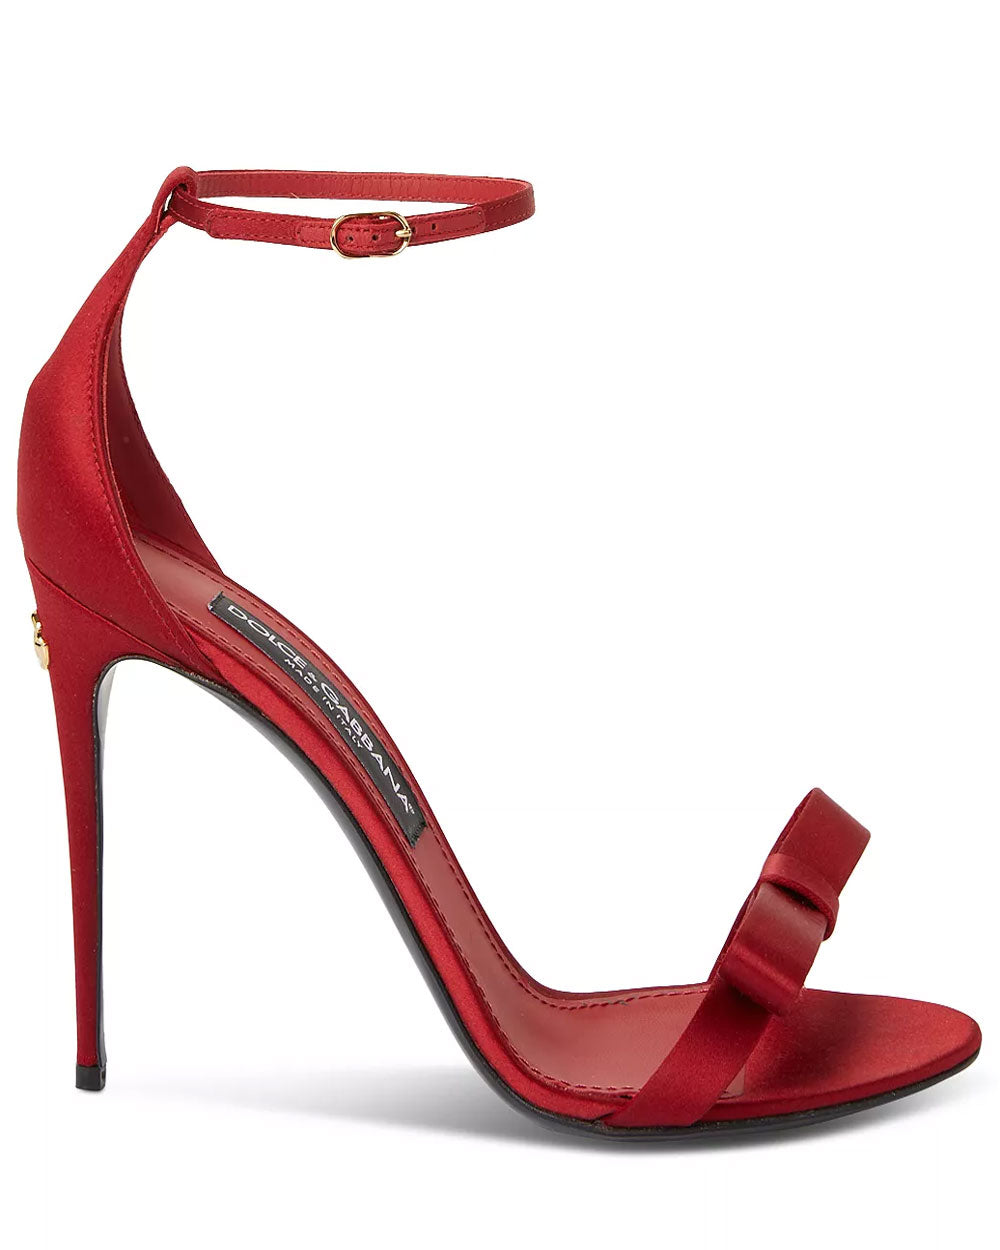 Satin Bow Sandal in Red